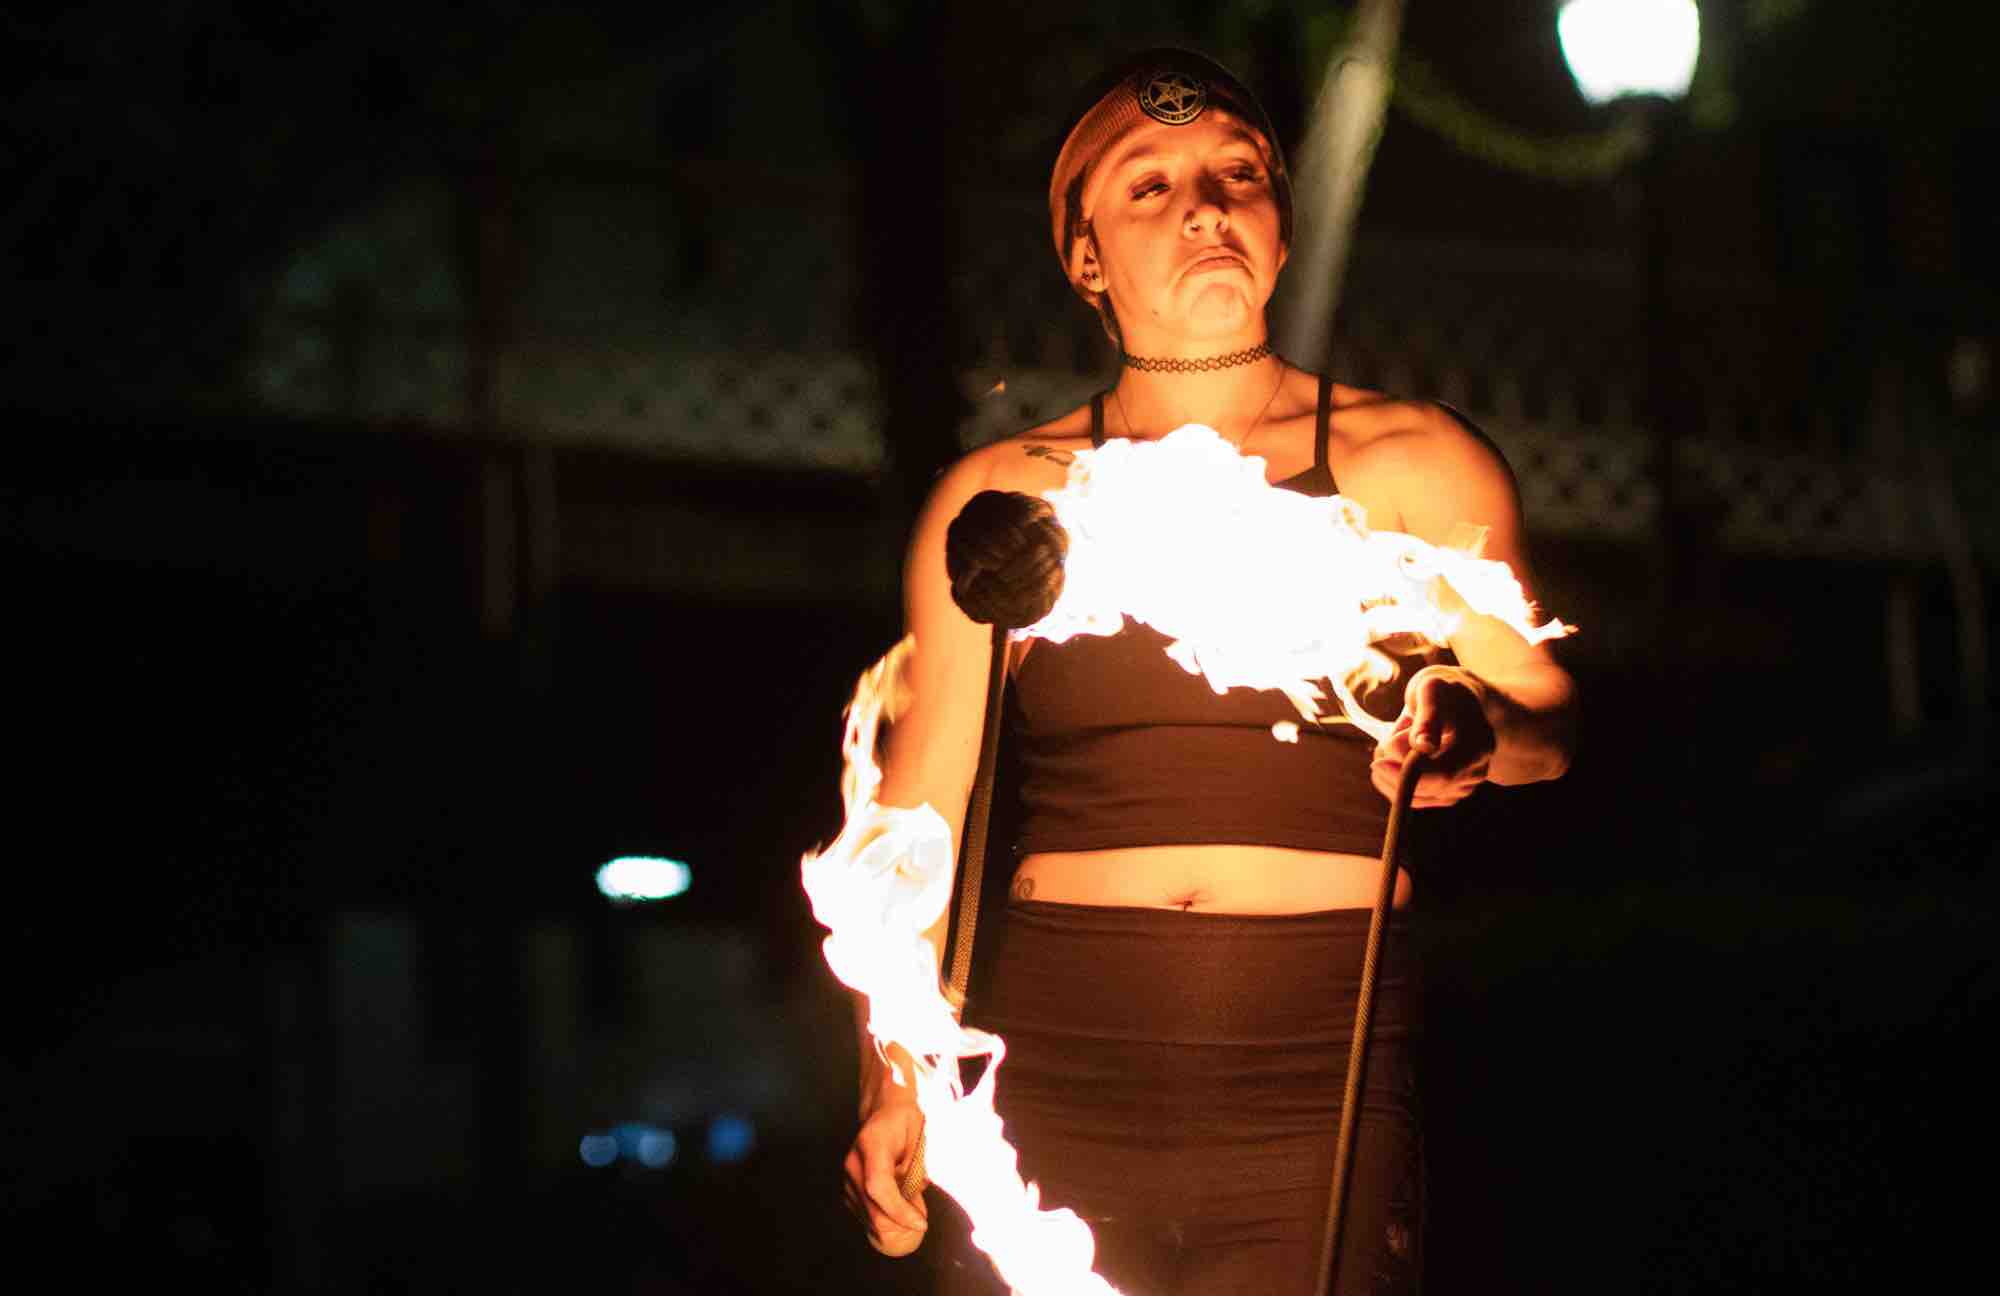 Fire performer at mountain music festival